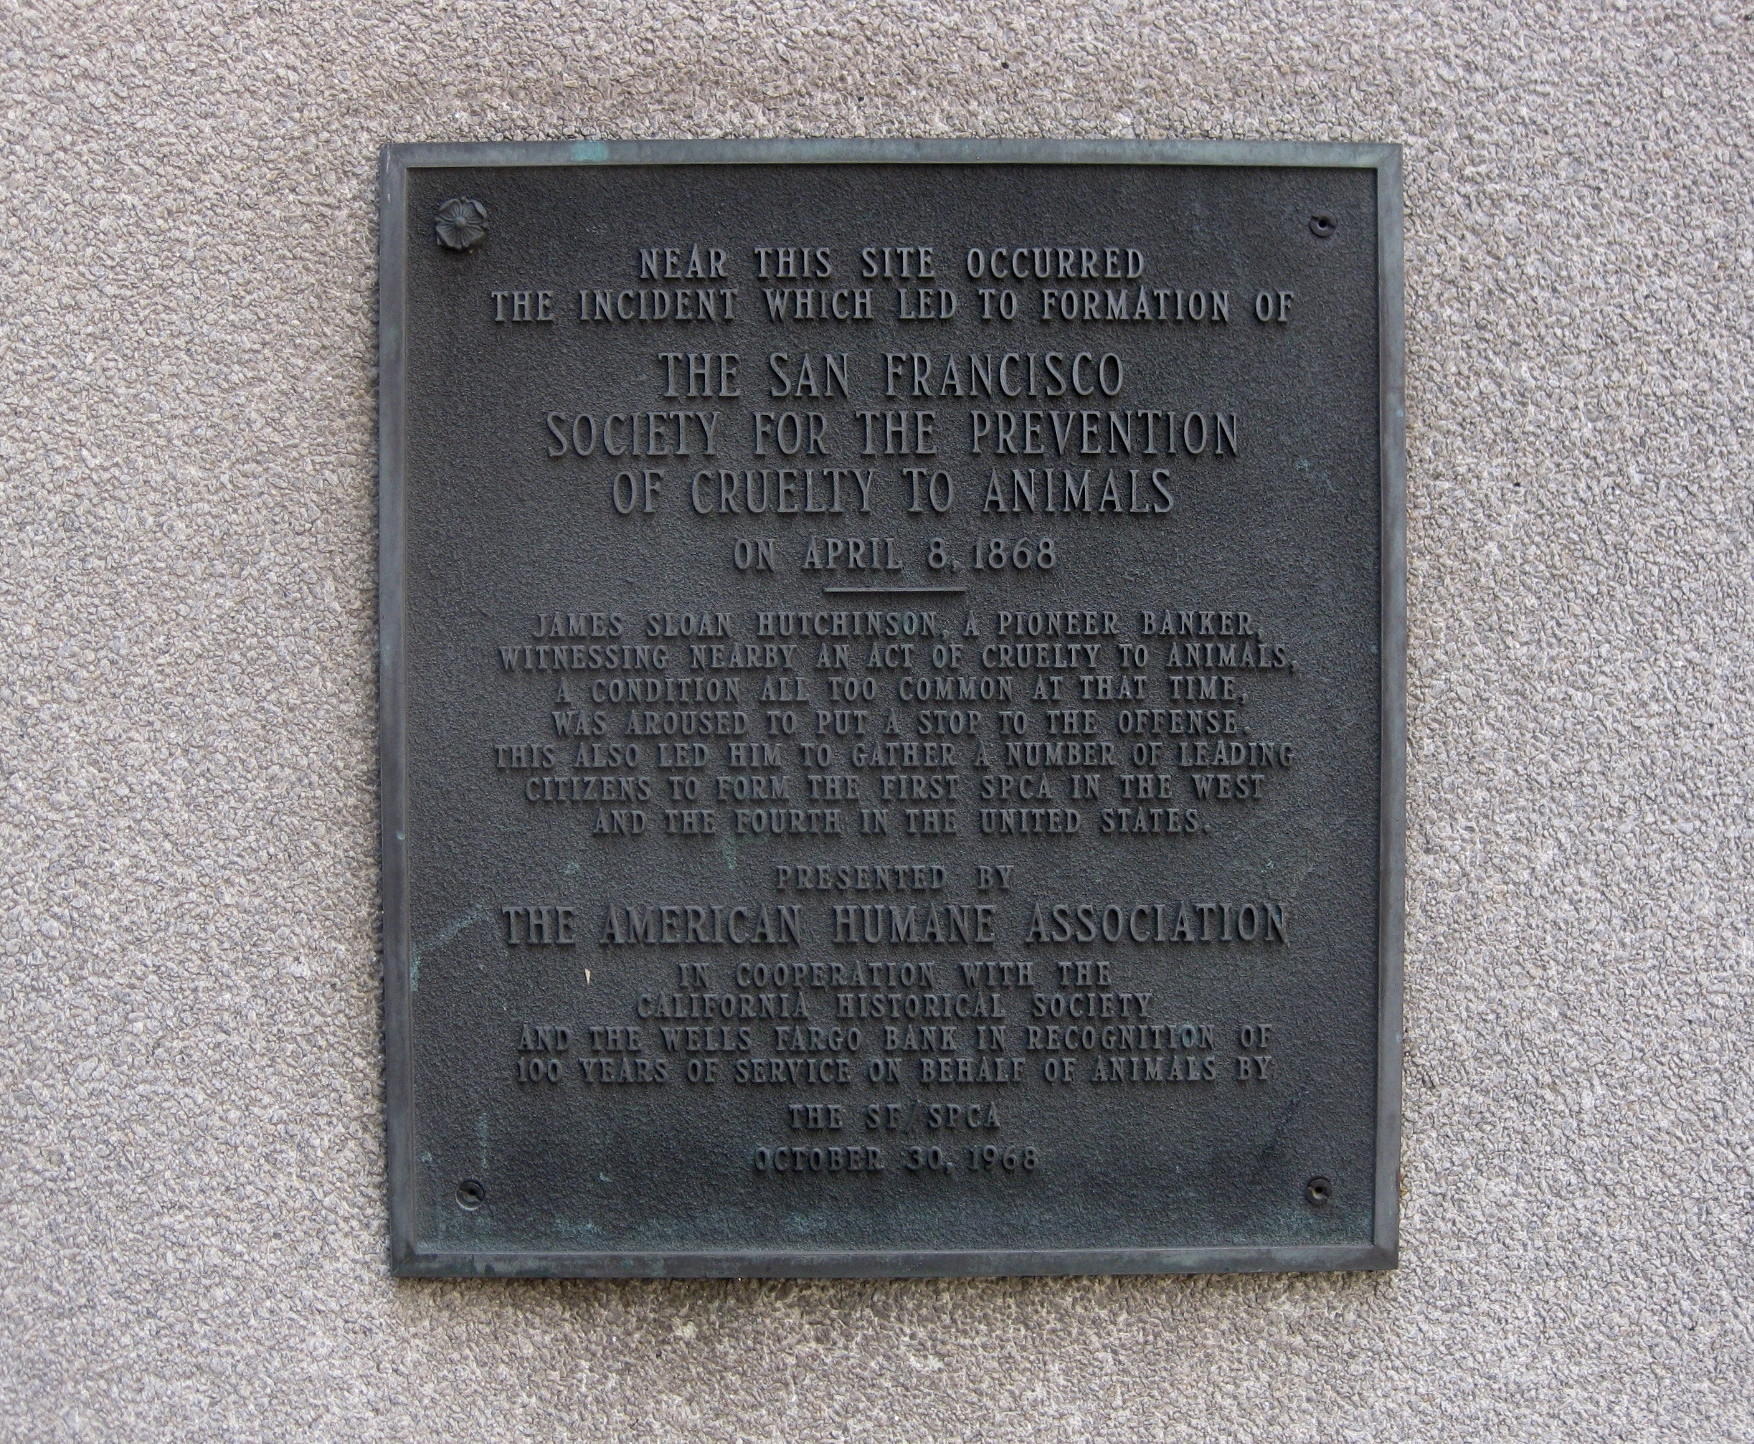 San Francisco Society for the Prevention of Cruelty to Animals (SF SPCA) Historical Marker